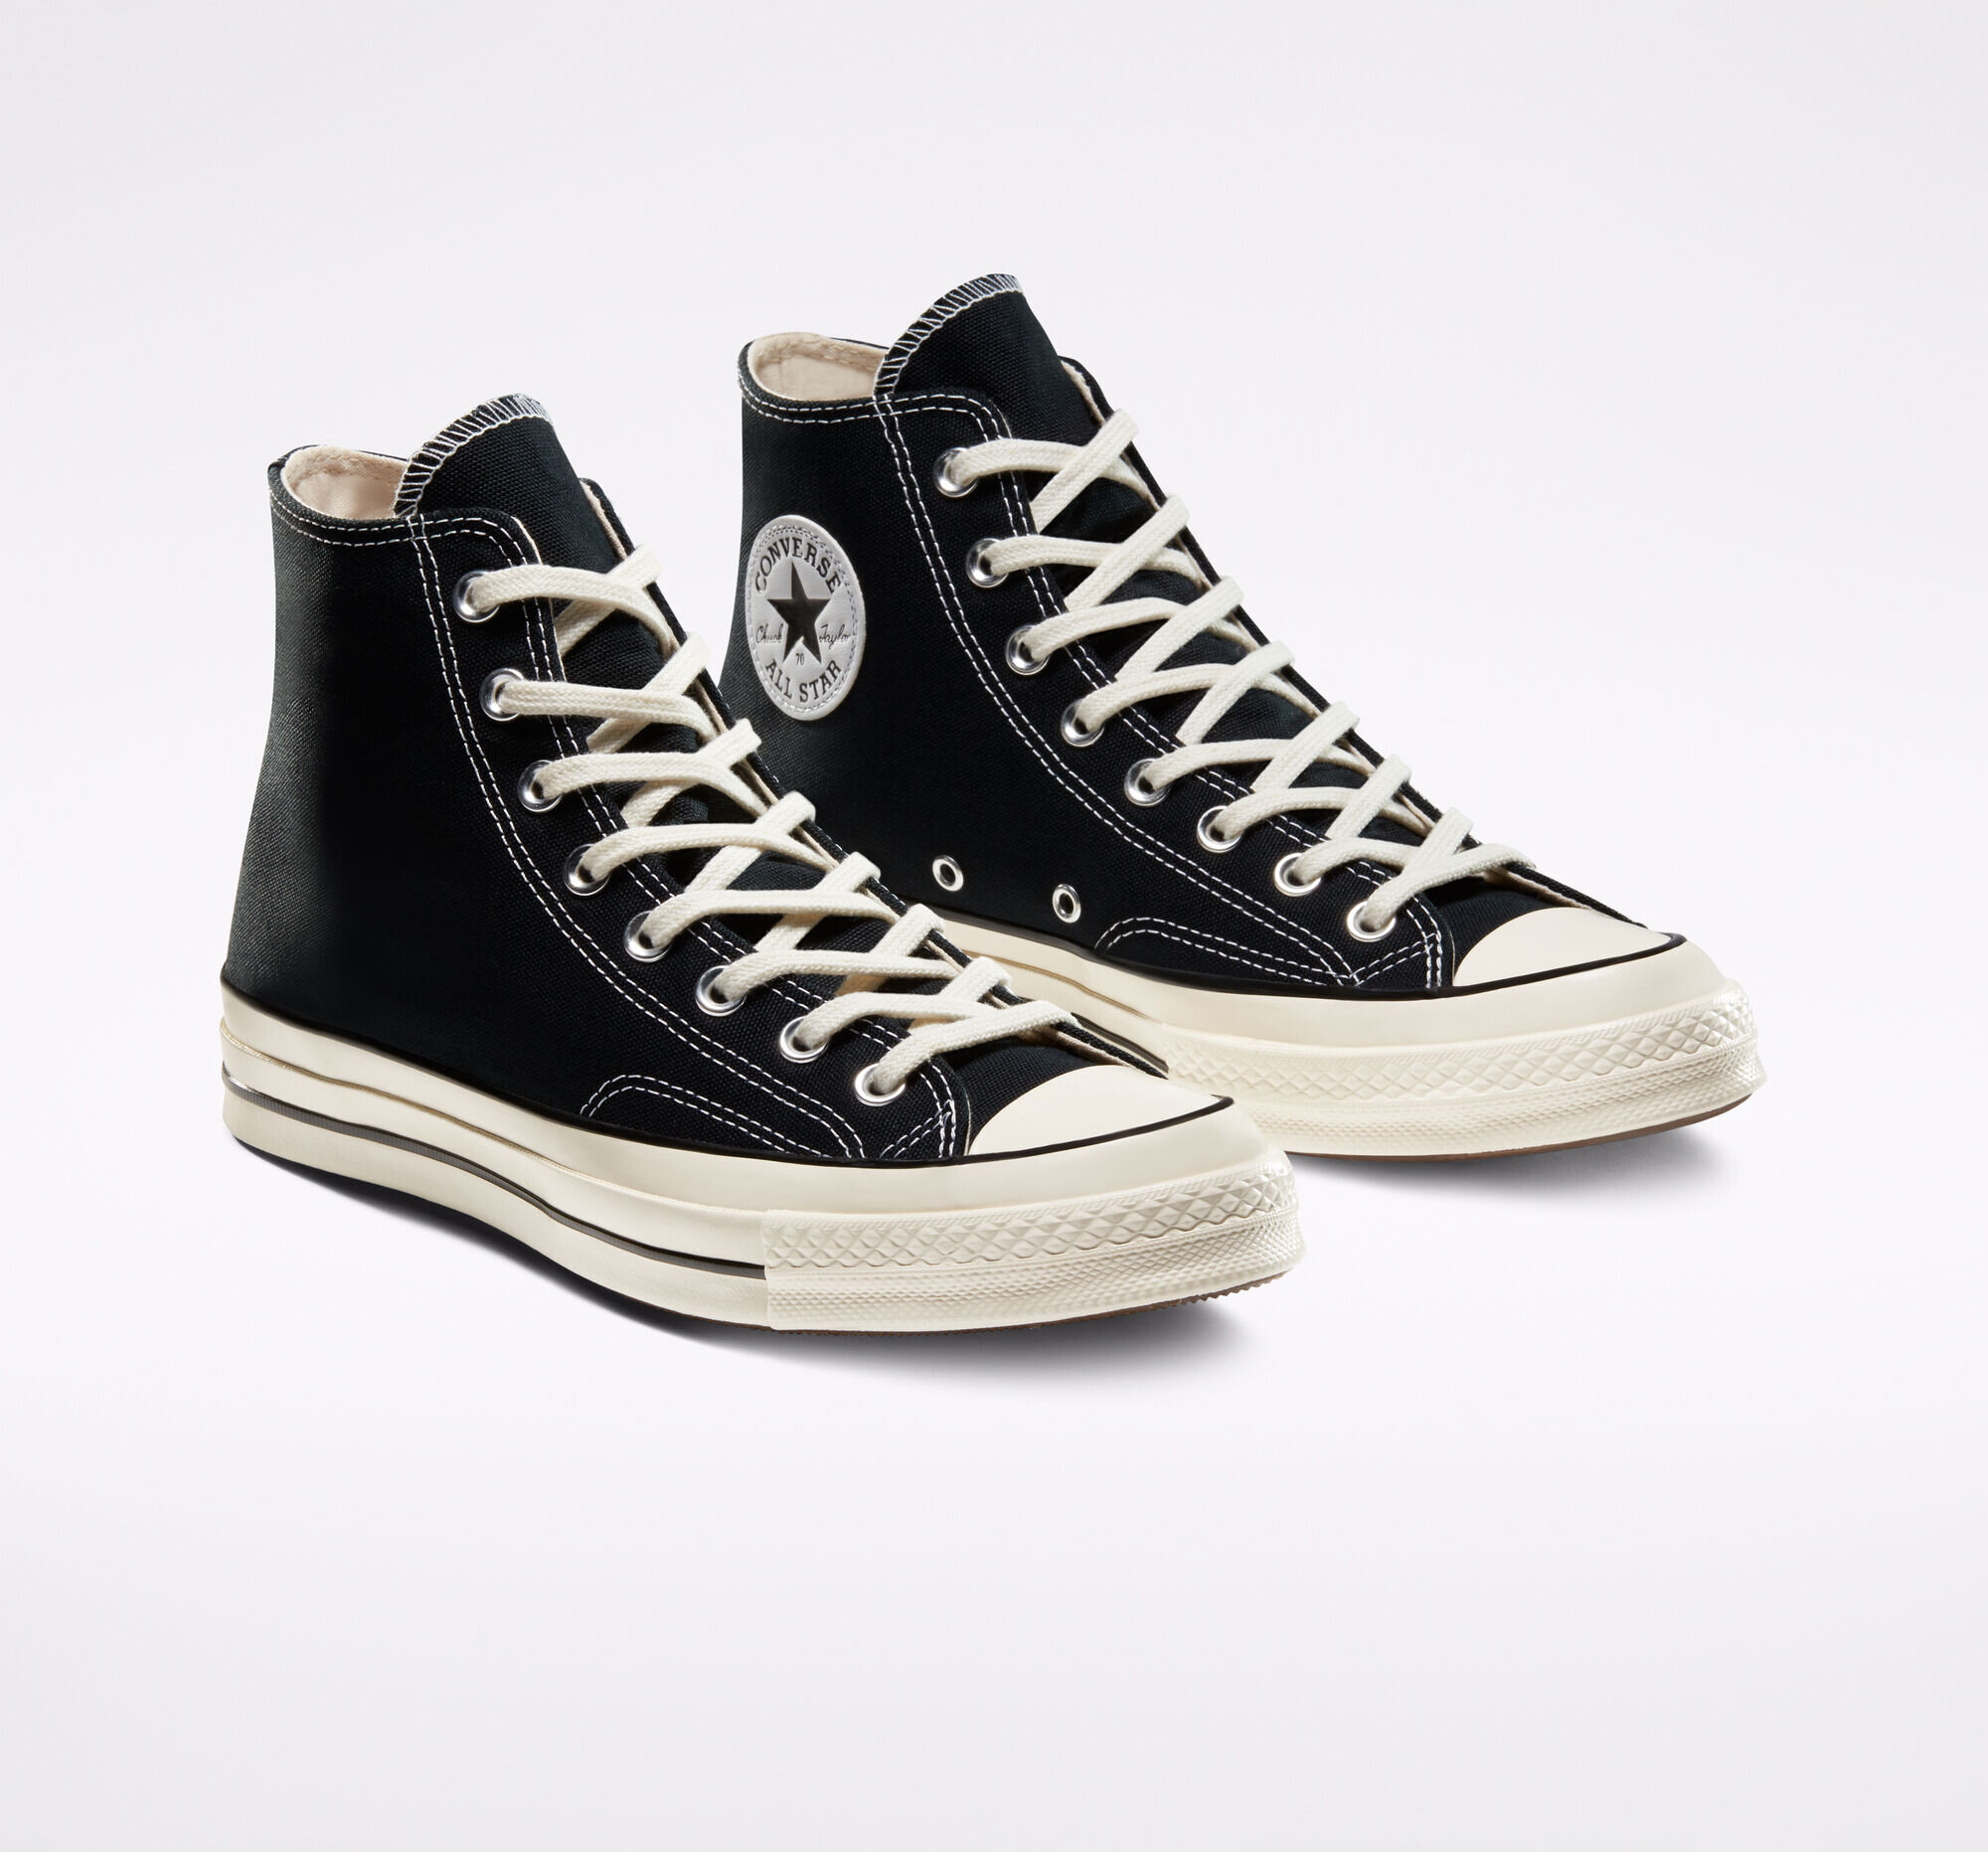 converse classic style